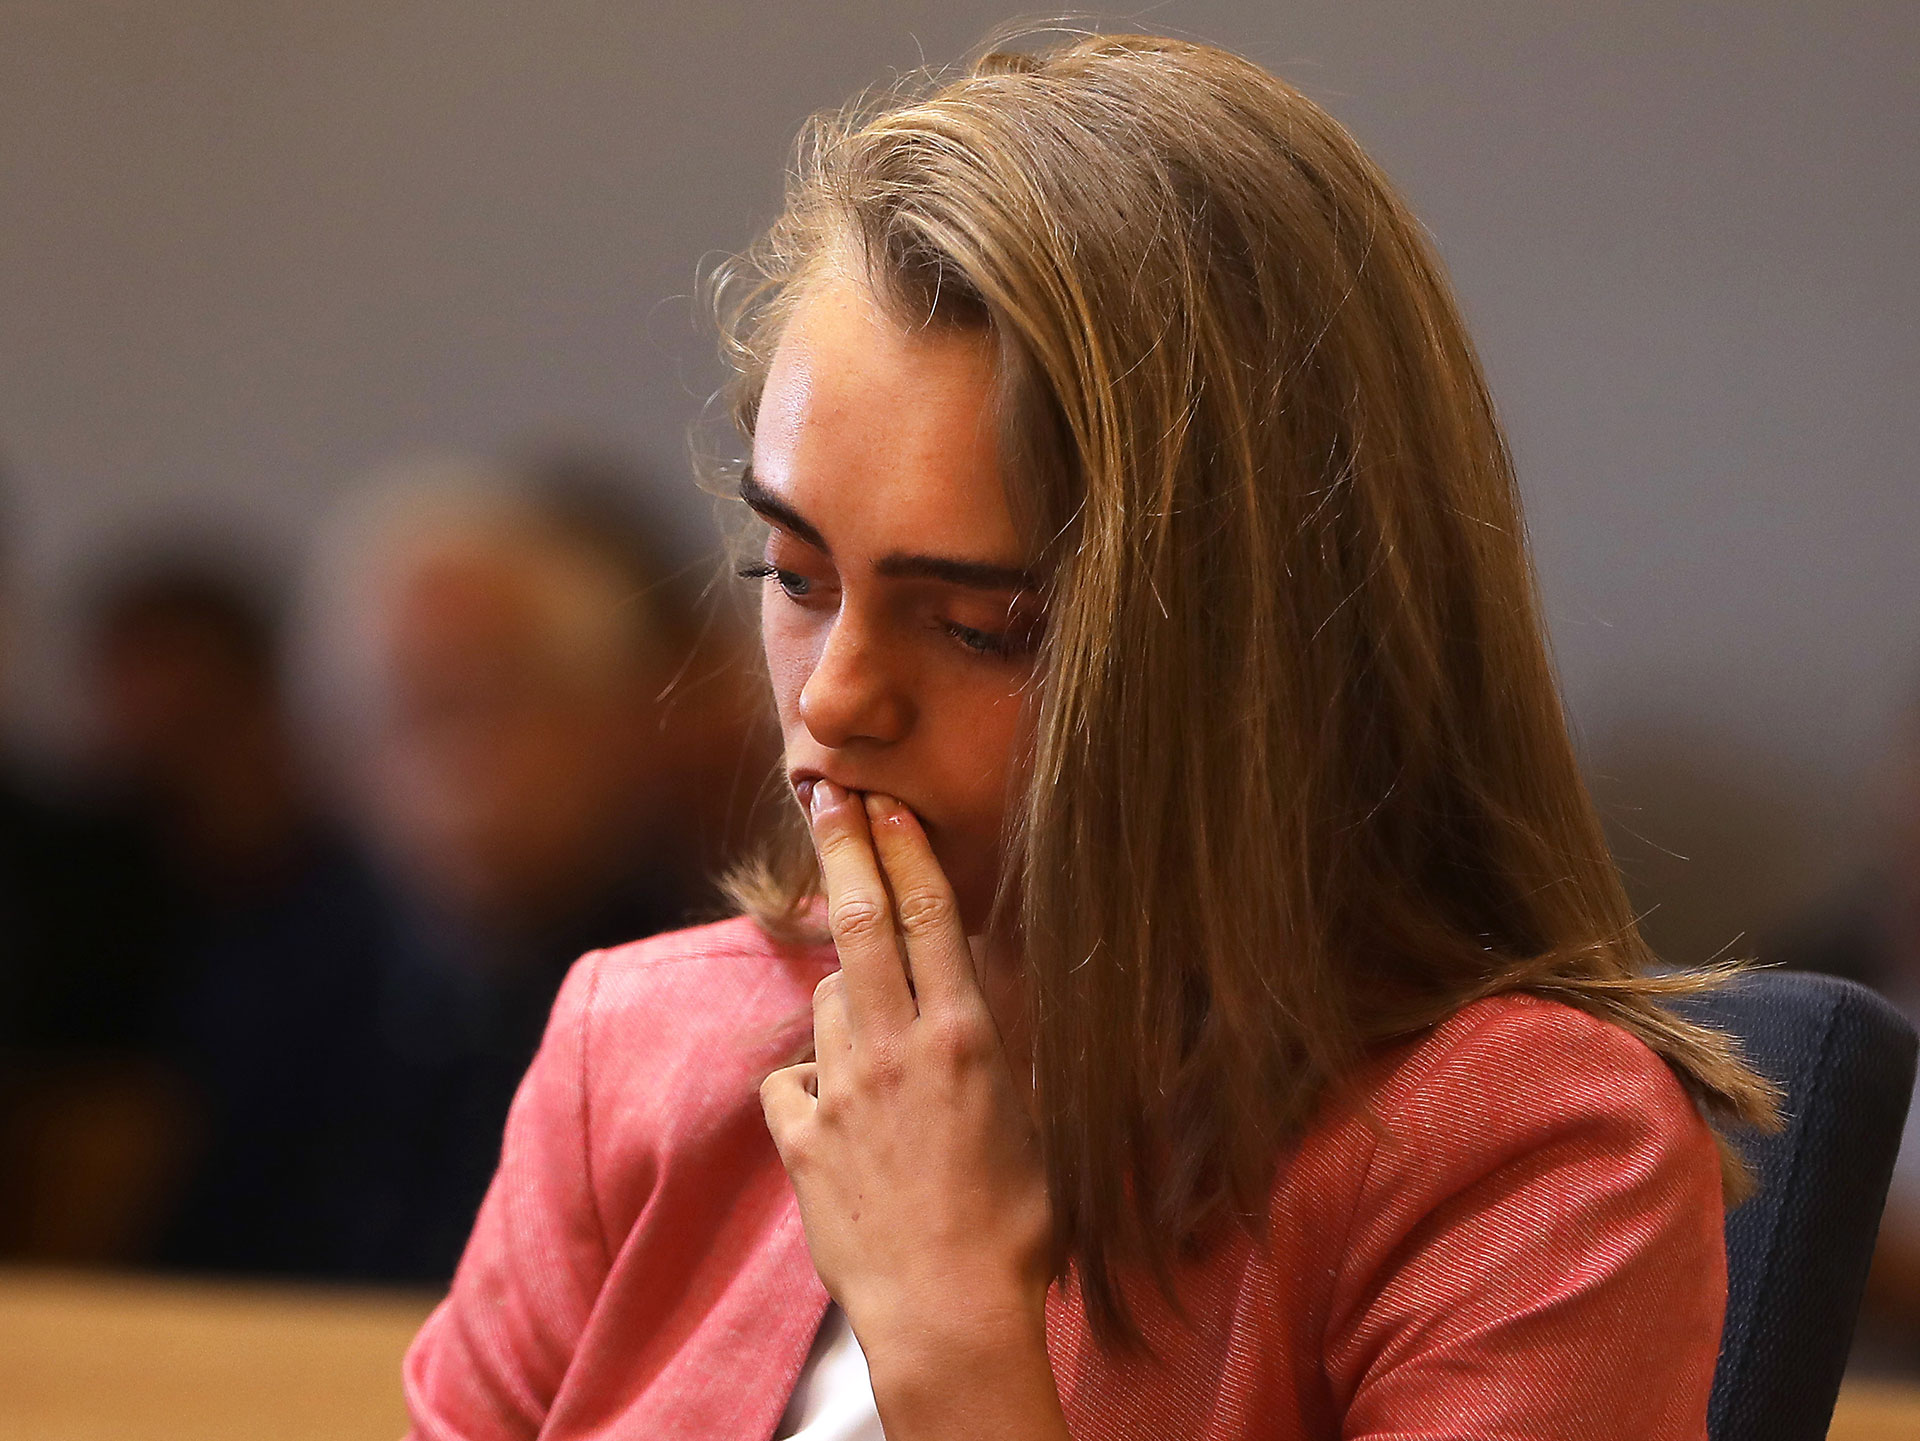 Young woman who texted boyfriend to kill himself said it was “my fault”